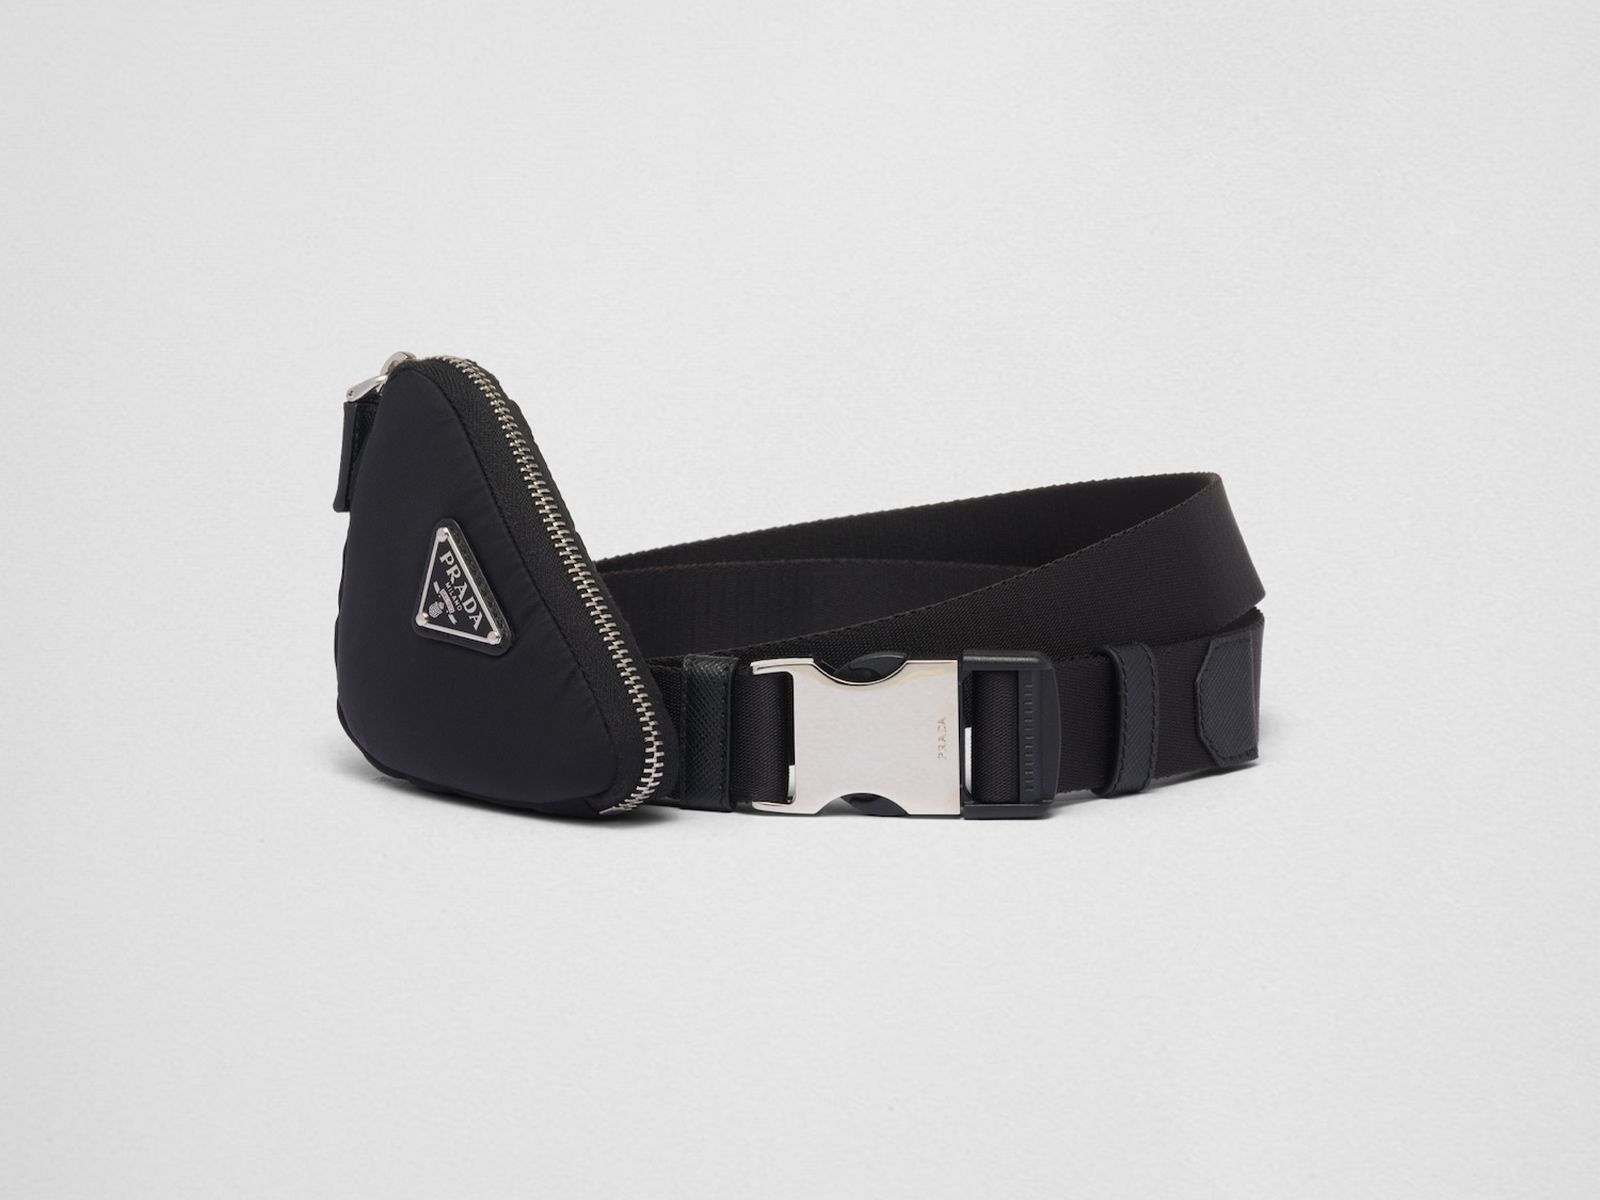 Functionality and elegance meet in Prada’s Re-Nylon Pouch Belt